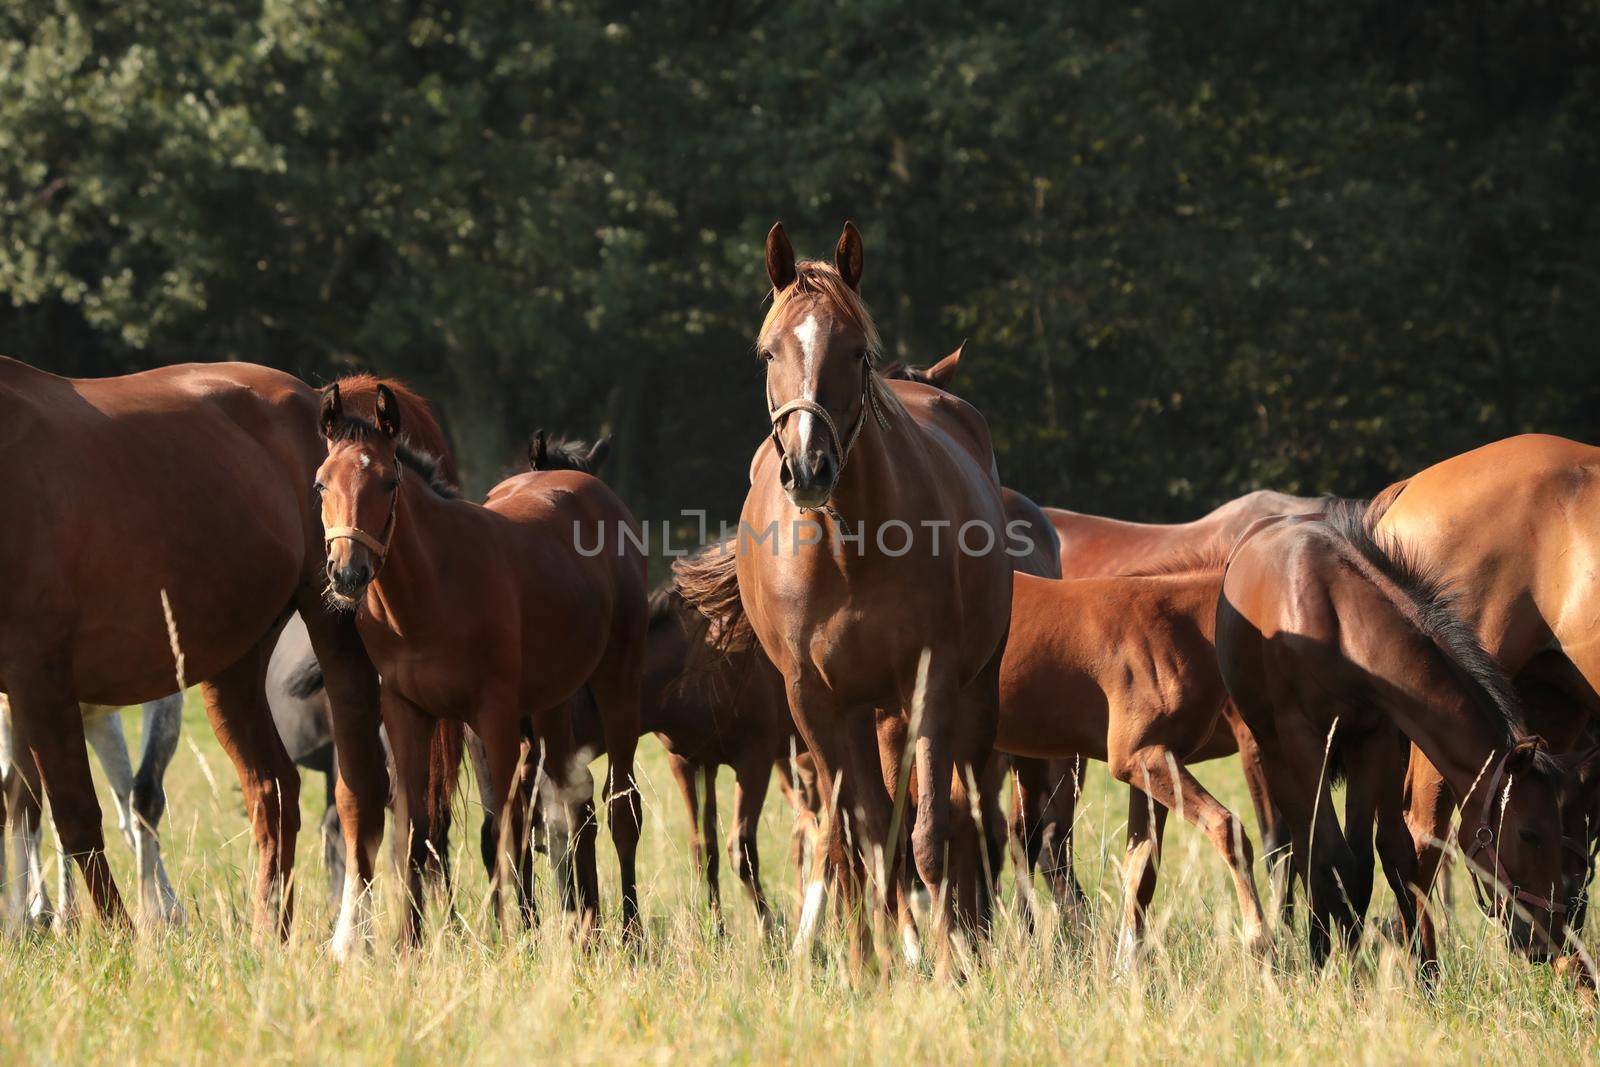 Horses in the pasture by nature78